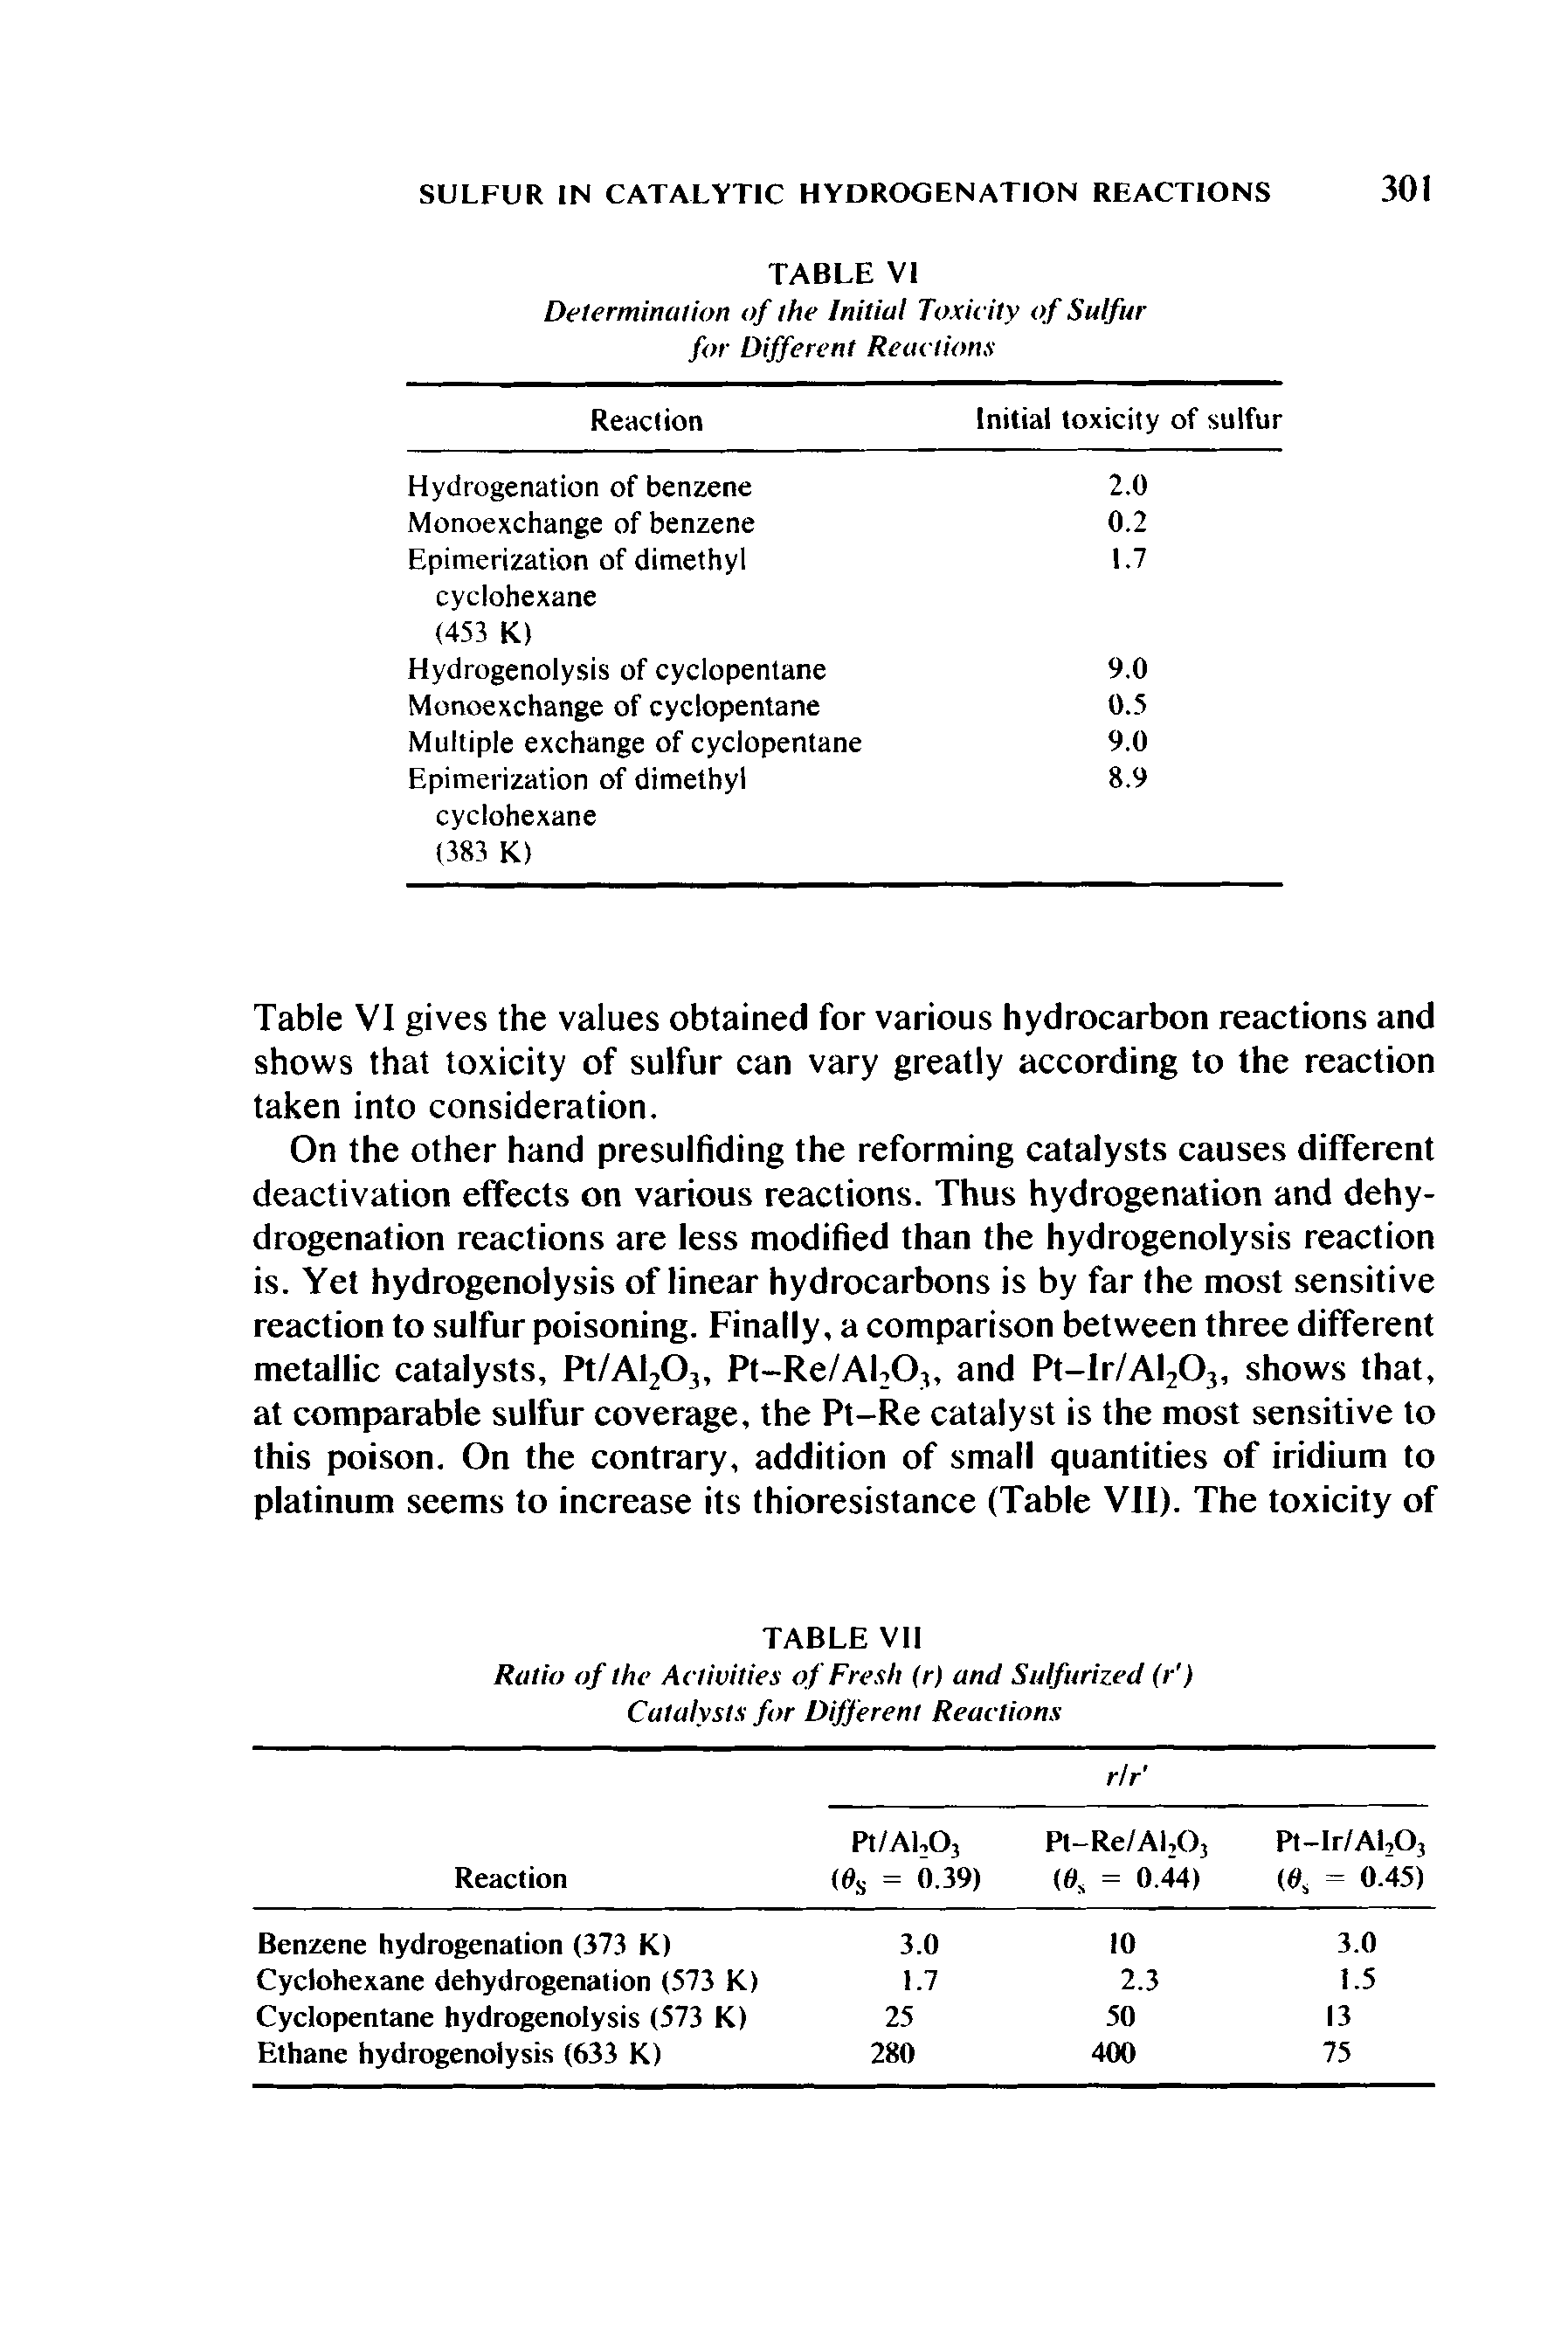 Table VI gives the values obtained for various hydrocarbon reactions and shows that toxicity of sulfur can vary greatly according to the reaction taken into consideration.